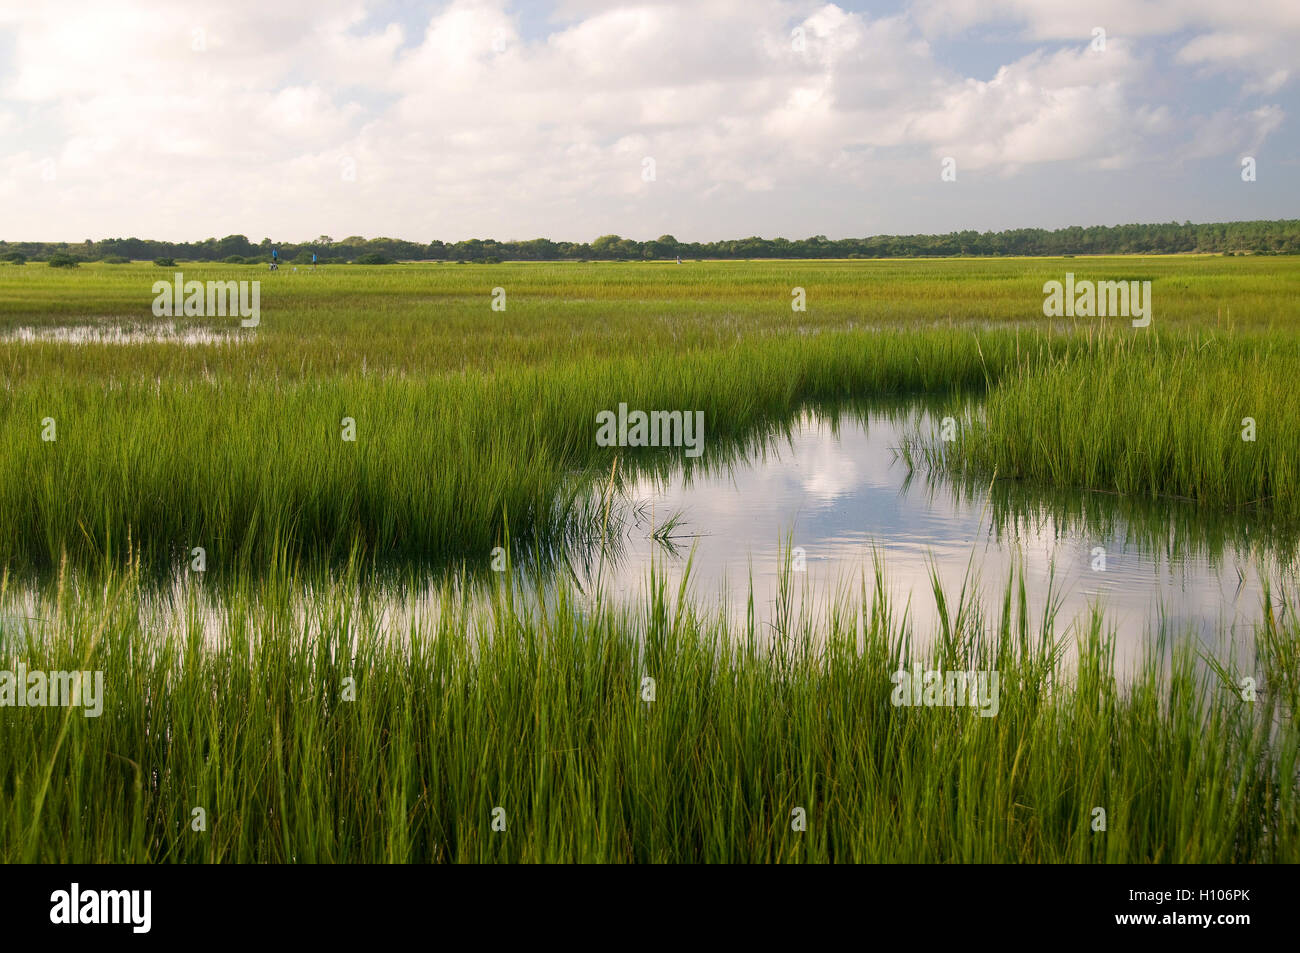 Aquatic vegetation on the inshore flats off Florida's pristine Intercoastal waterway is often home to redfish and seatrout. Stock Photo